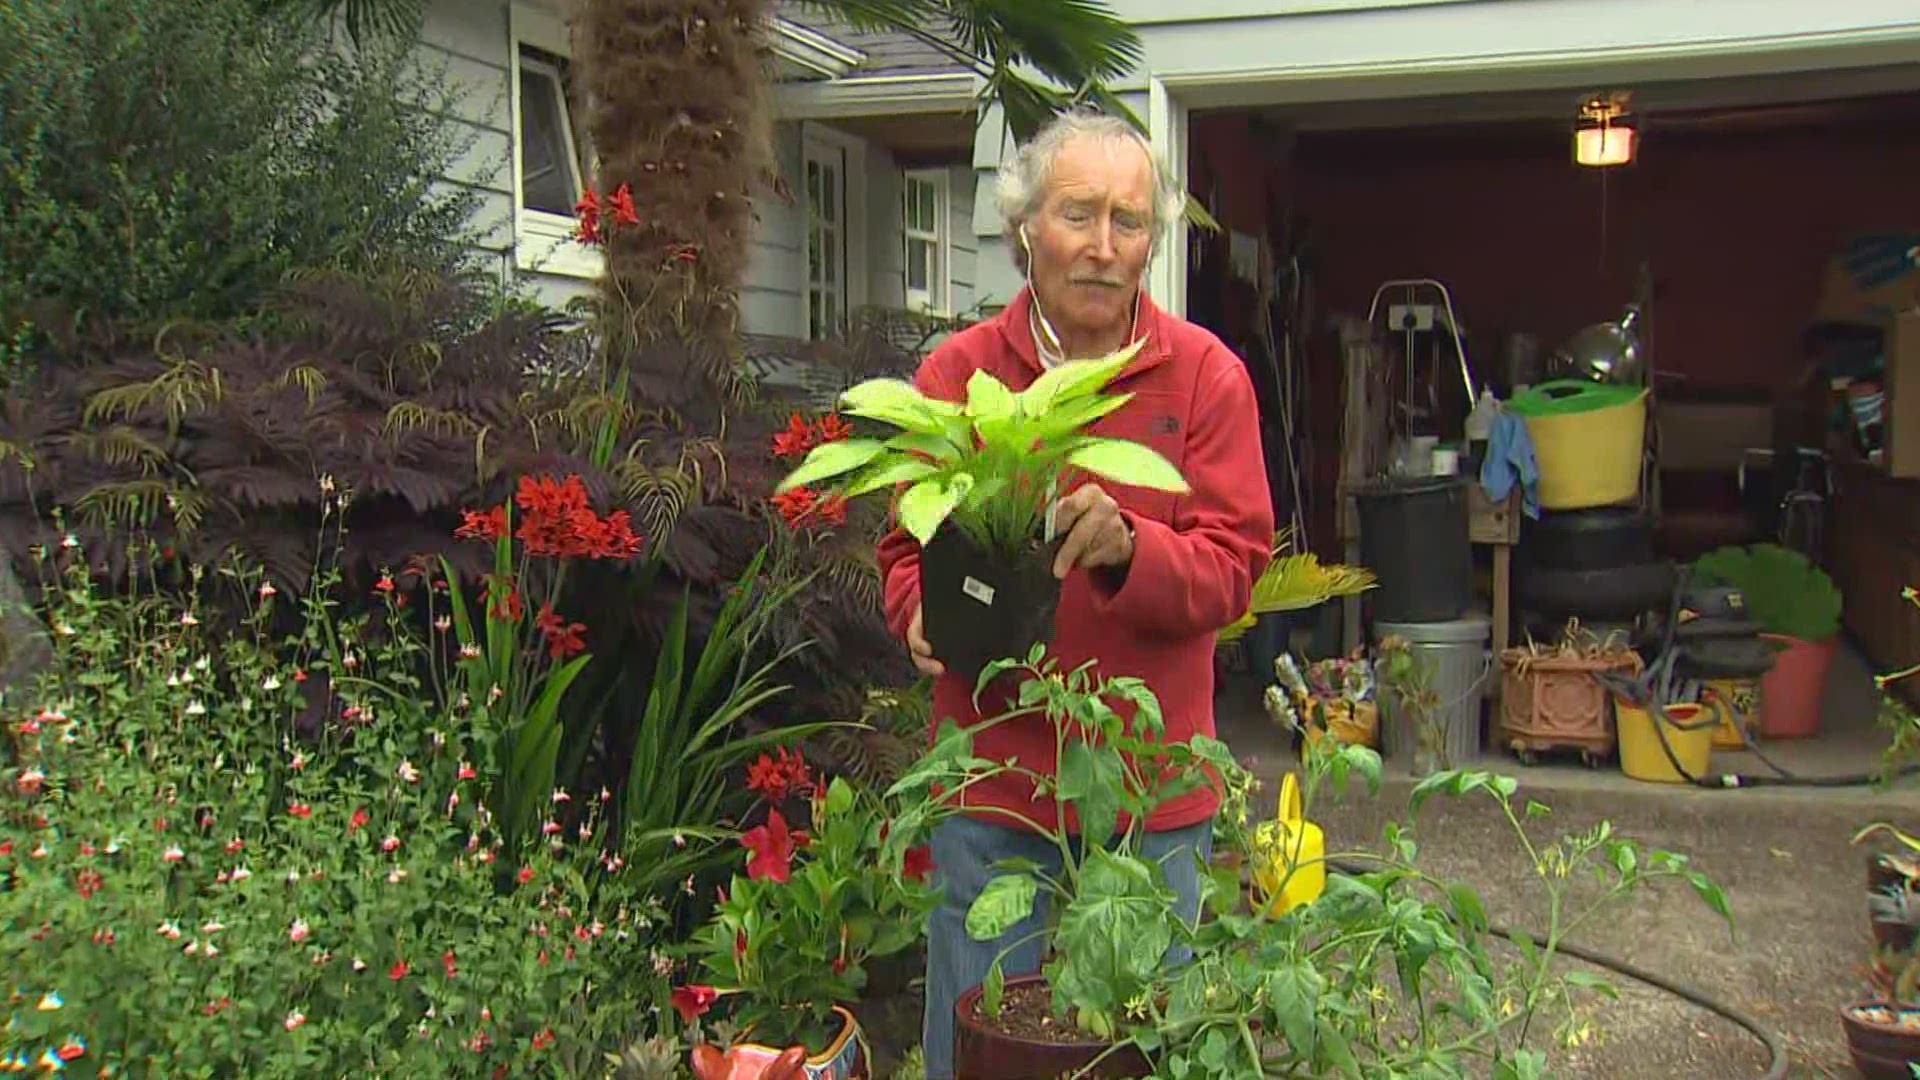 Gardening expert Ciscoe Morris shares tips to help your garden thrive if it was impacted by the Pacific Northwest's heat wave.